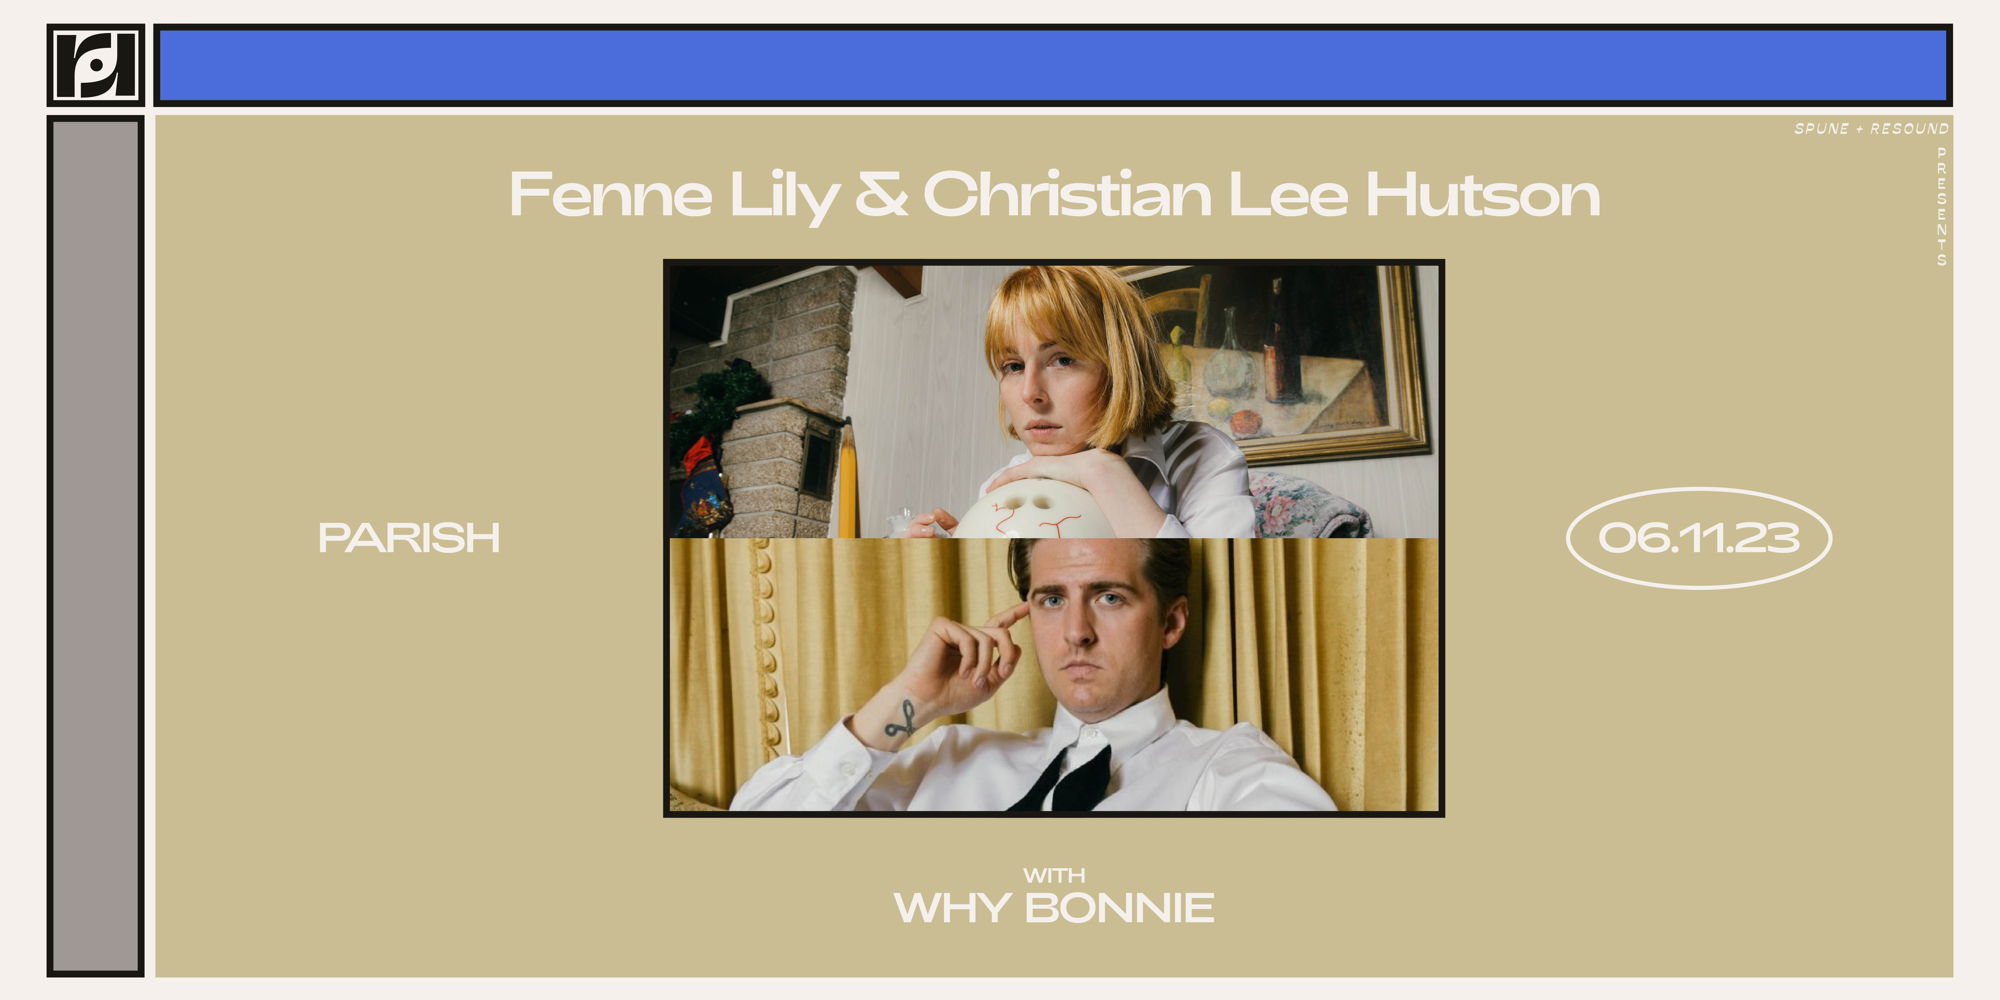 Spune and Resound Present: Fenne Lily & Christian Lee Hutson w/ Why Bonnie at Parish on 6/11 promotional image